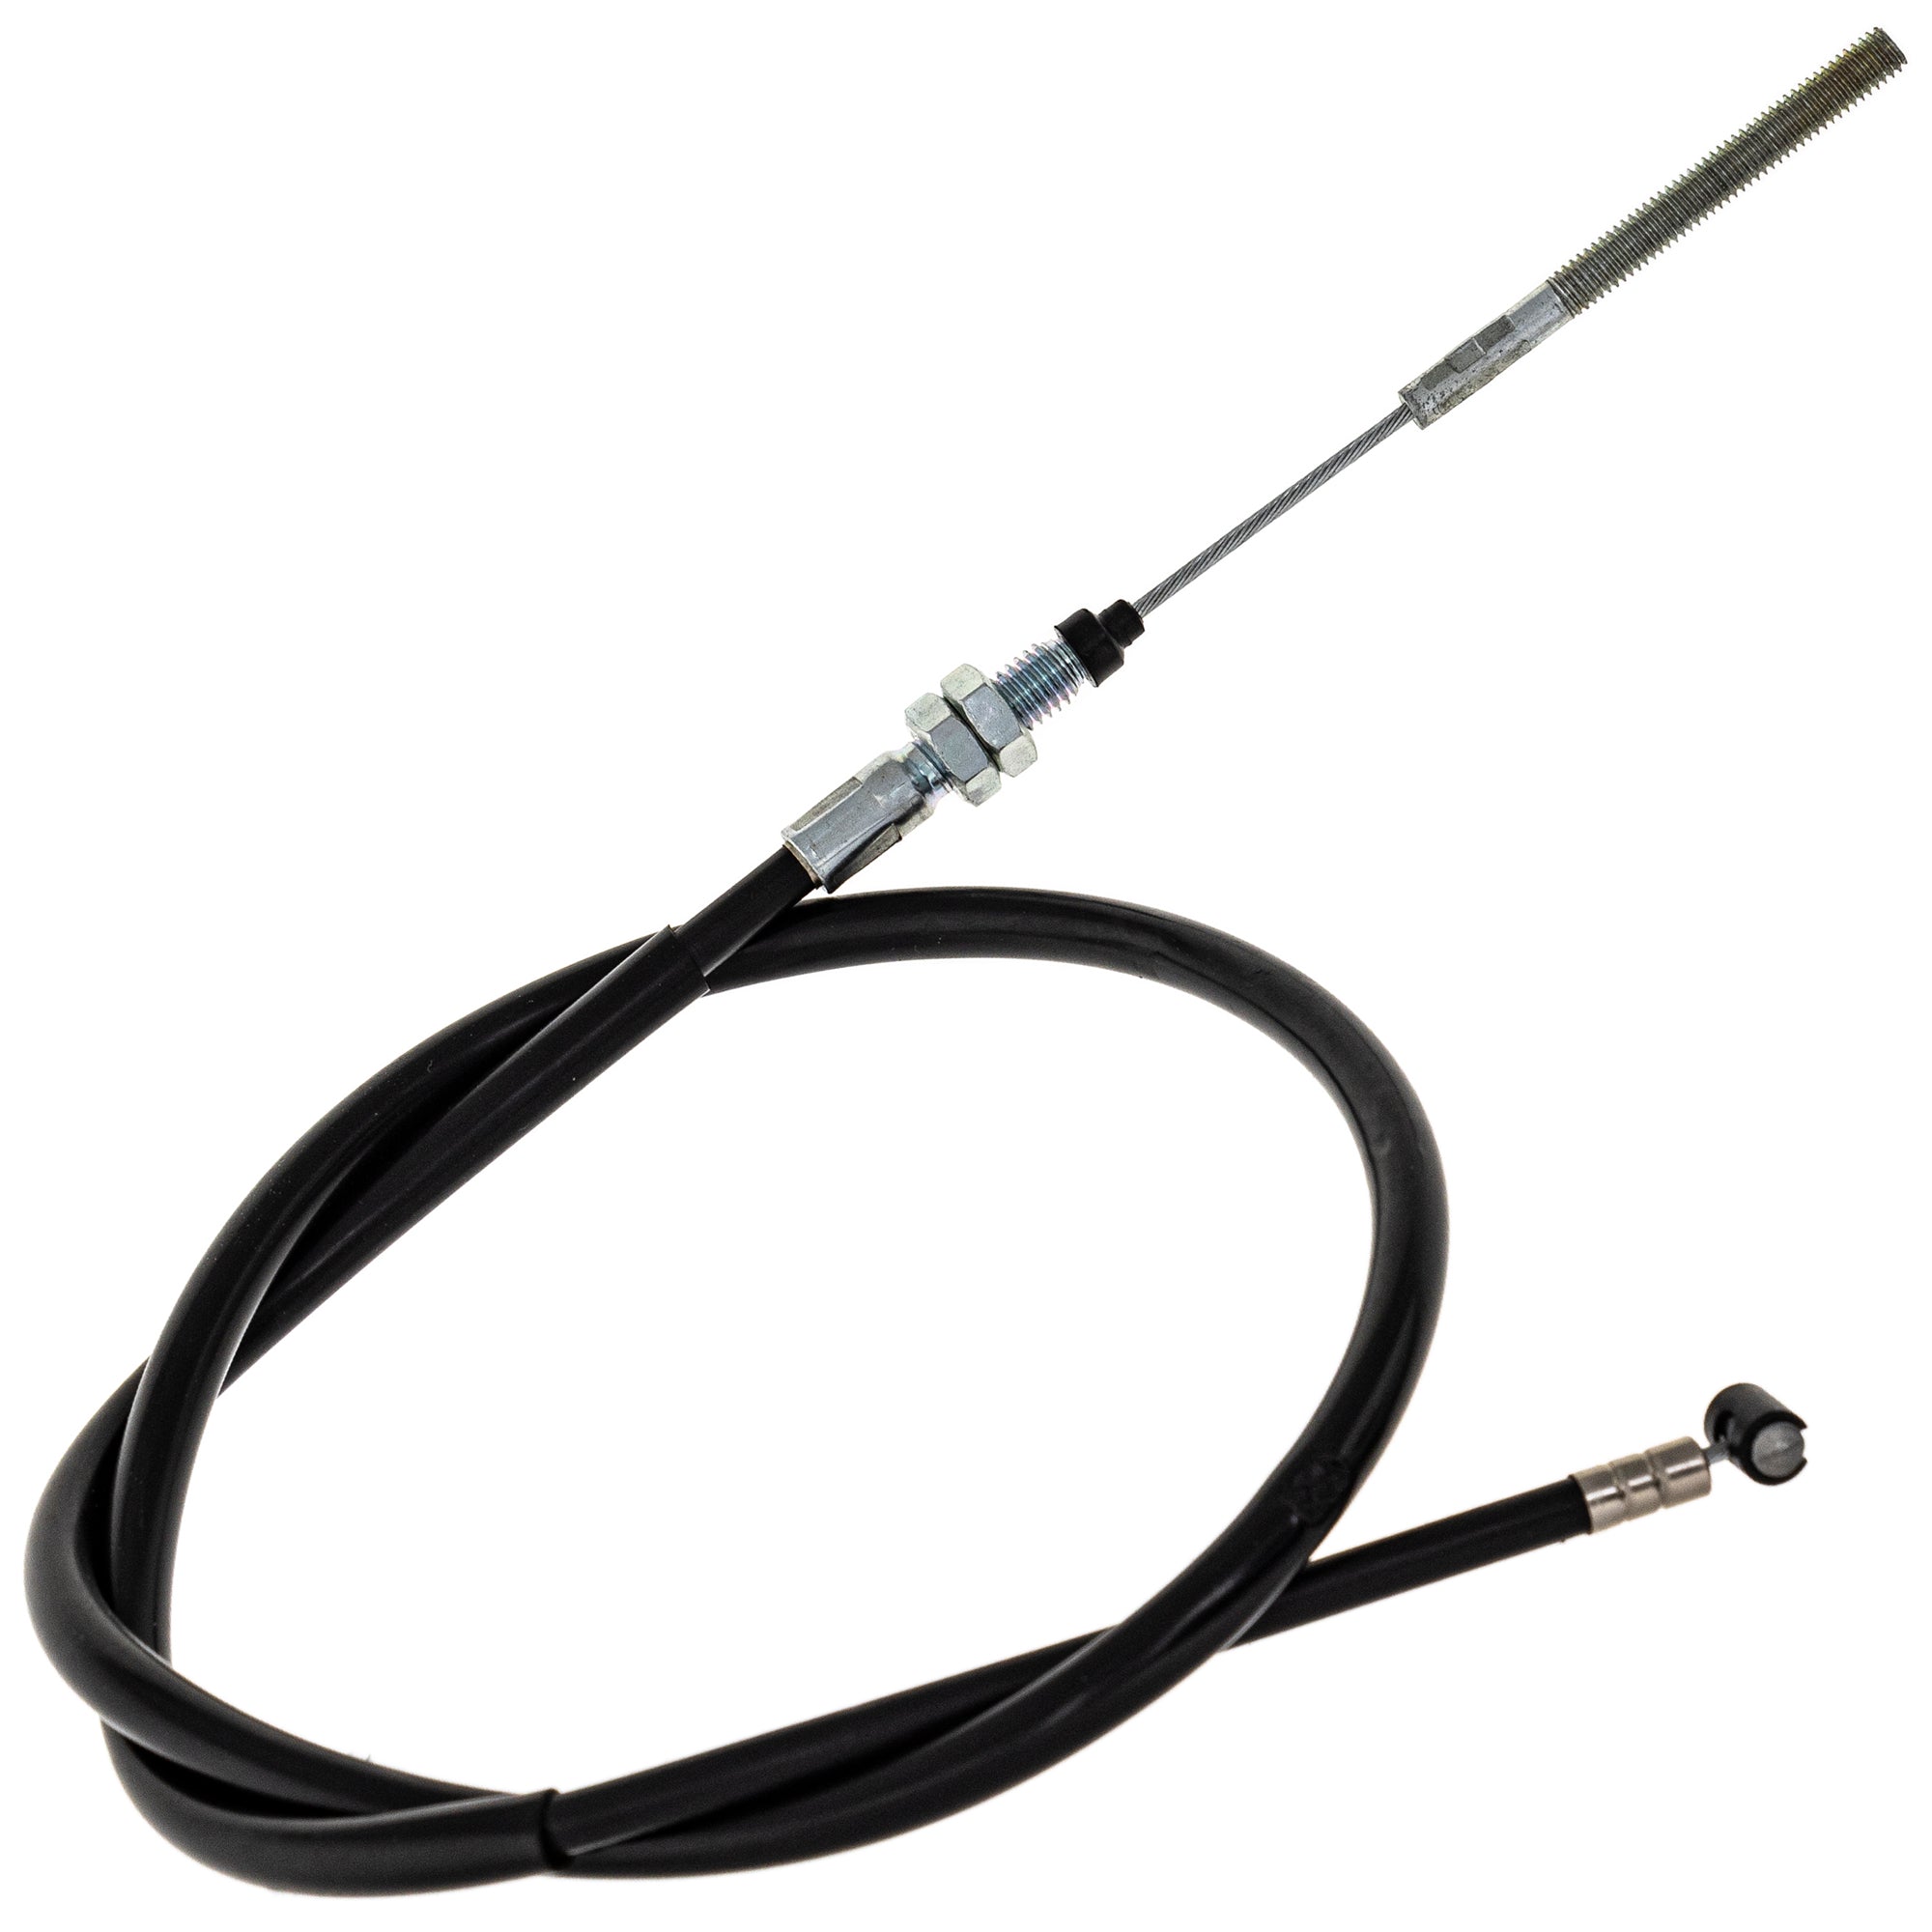 Decompression Cable for Honda CRF50F Motorcycle